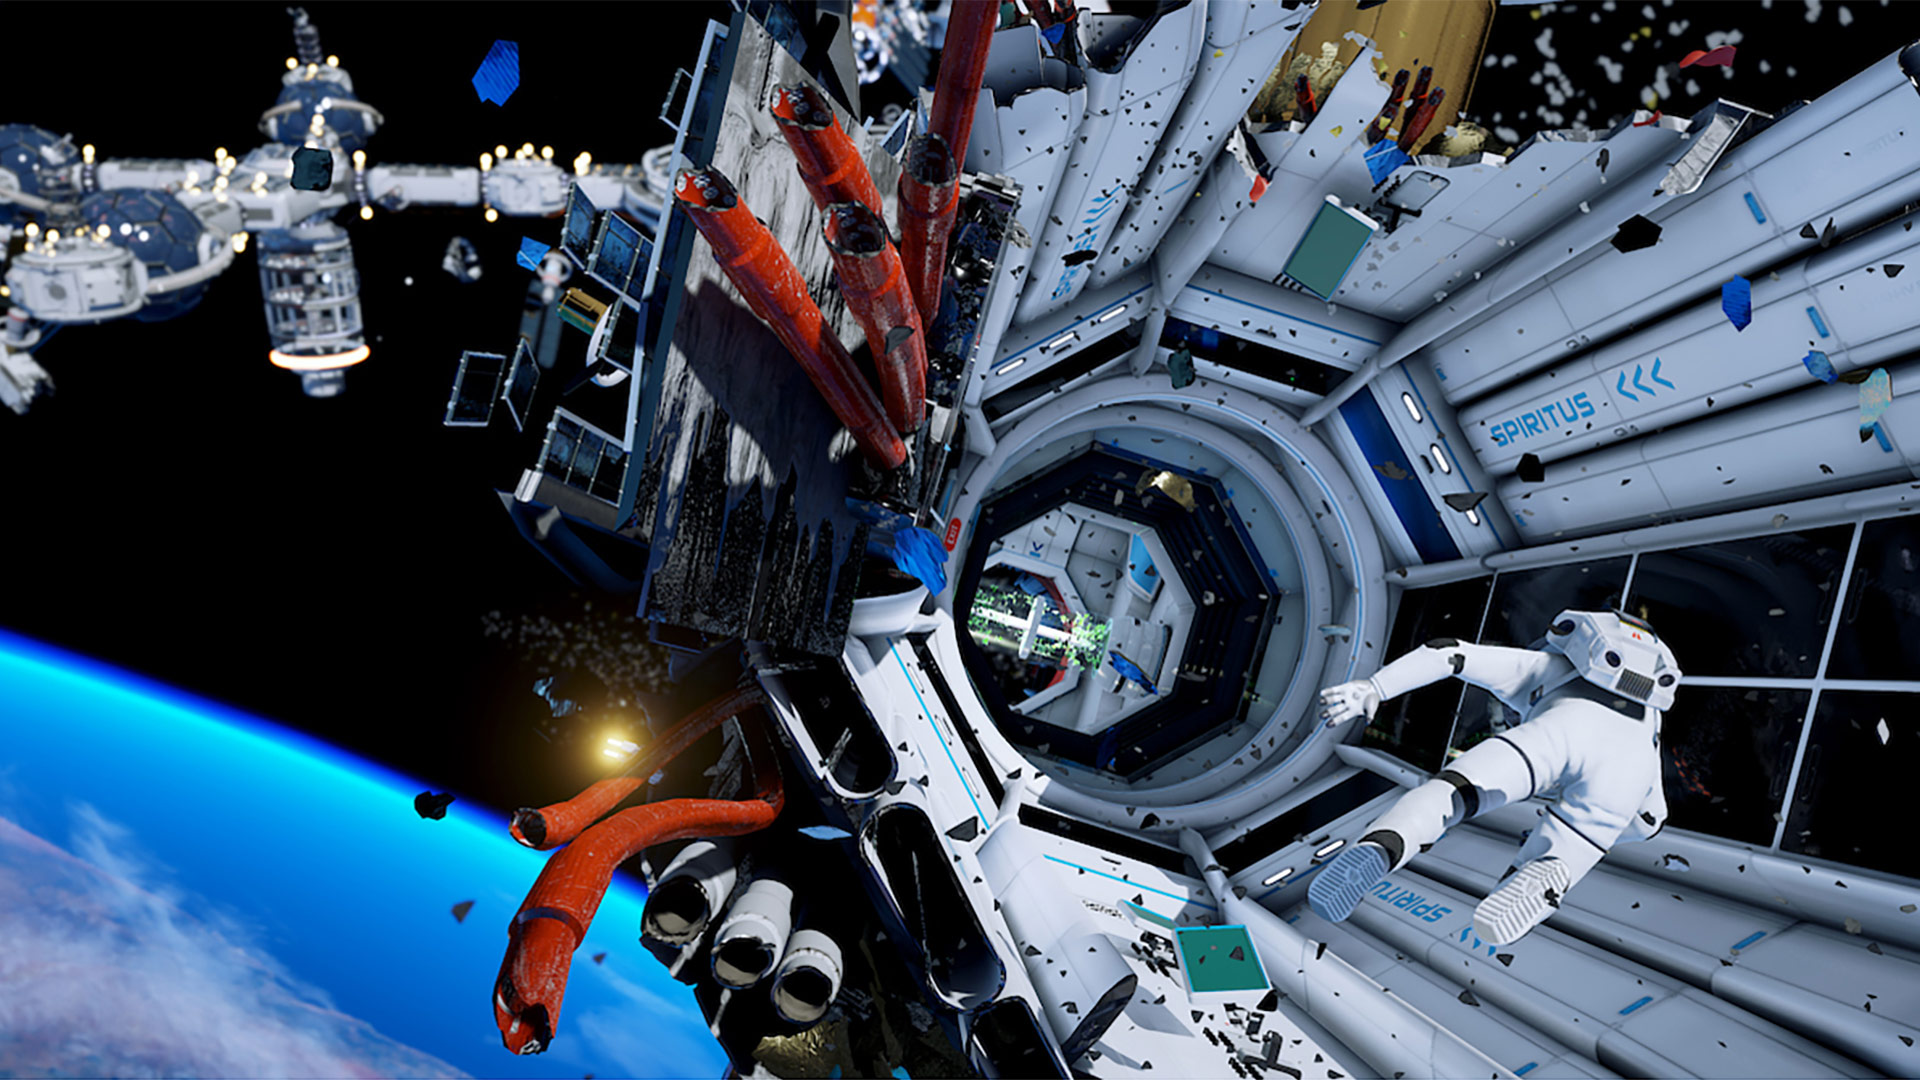 ADR1FT High Quality Background on Wallpapers Vista